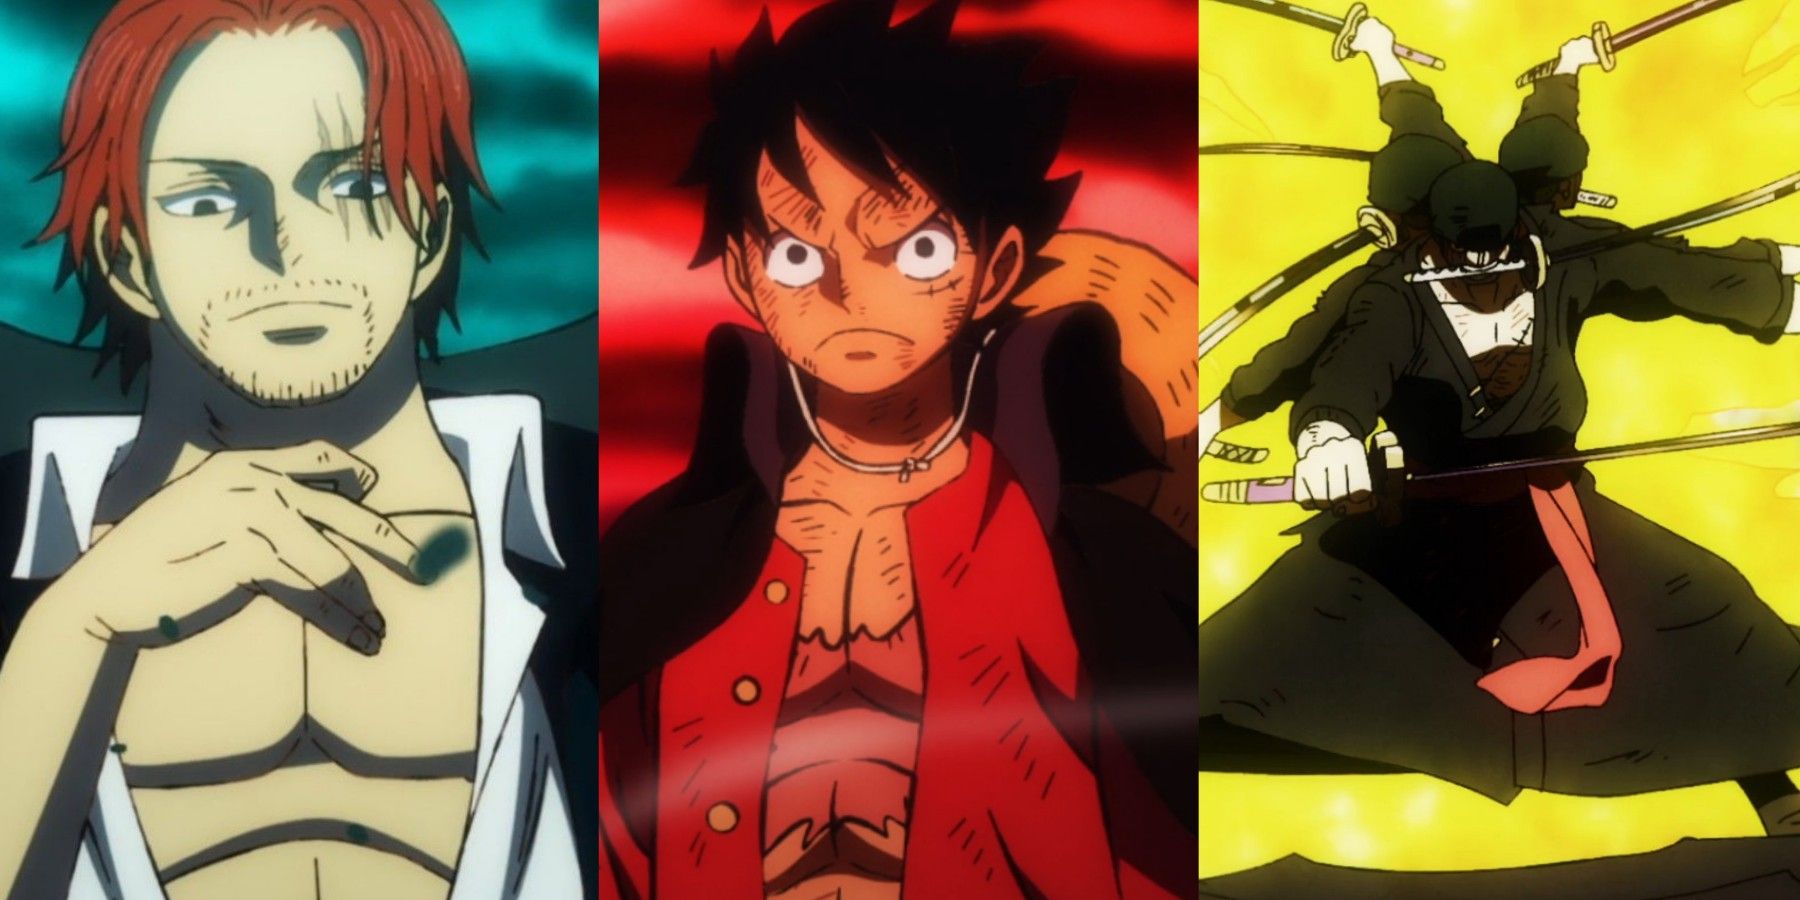 featured One Piece 7 Strongest Characters Who Can Use All Three Types Of Haki Zoro Luffy Shanks